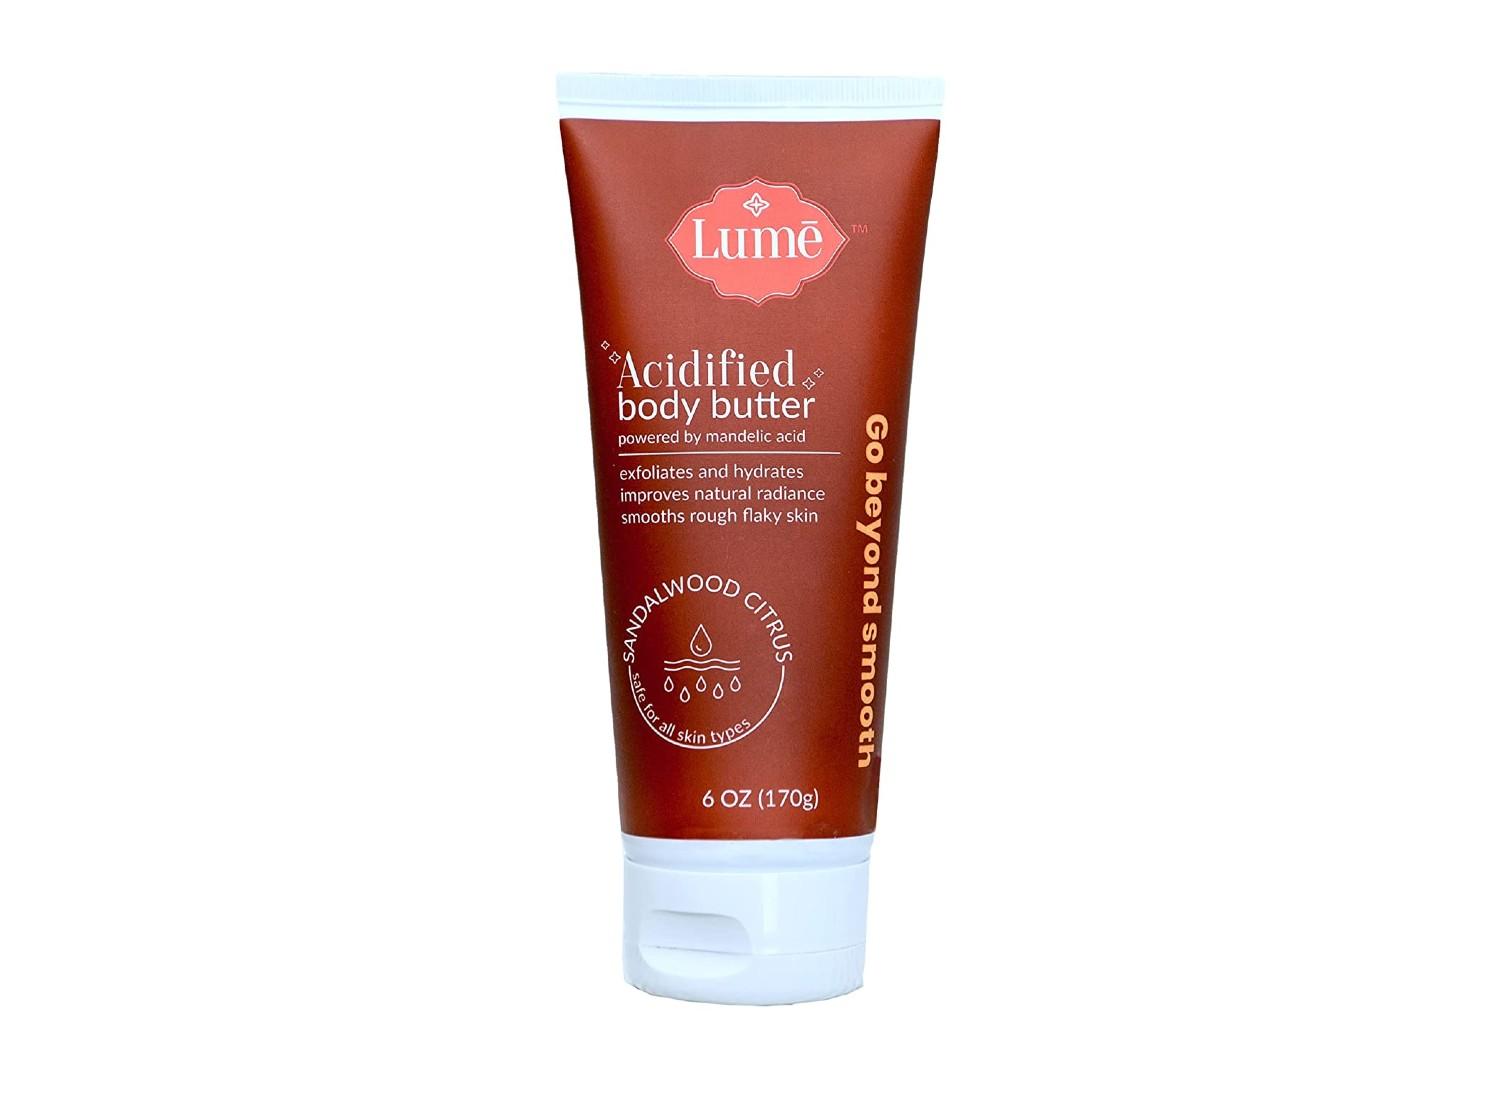 A bottle of Lume Acidified Body Butter on a white background.